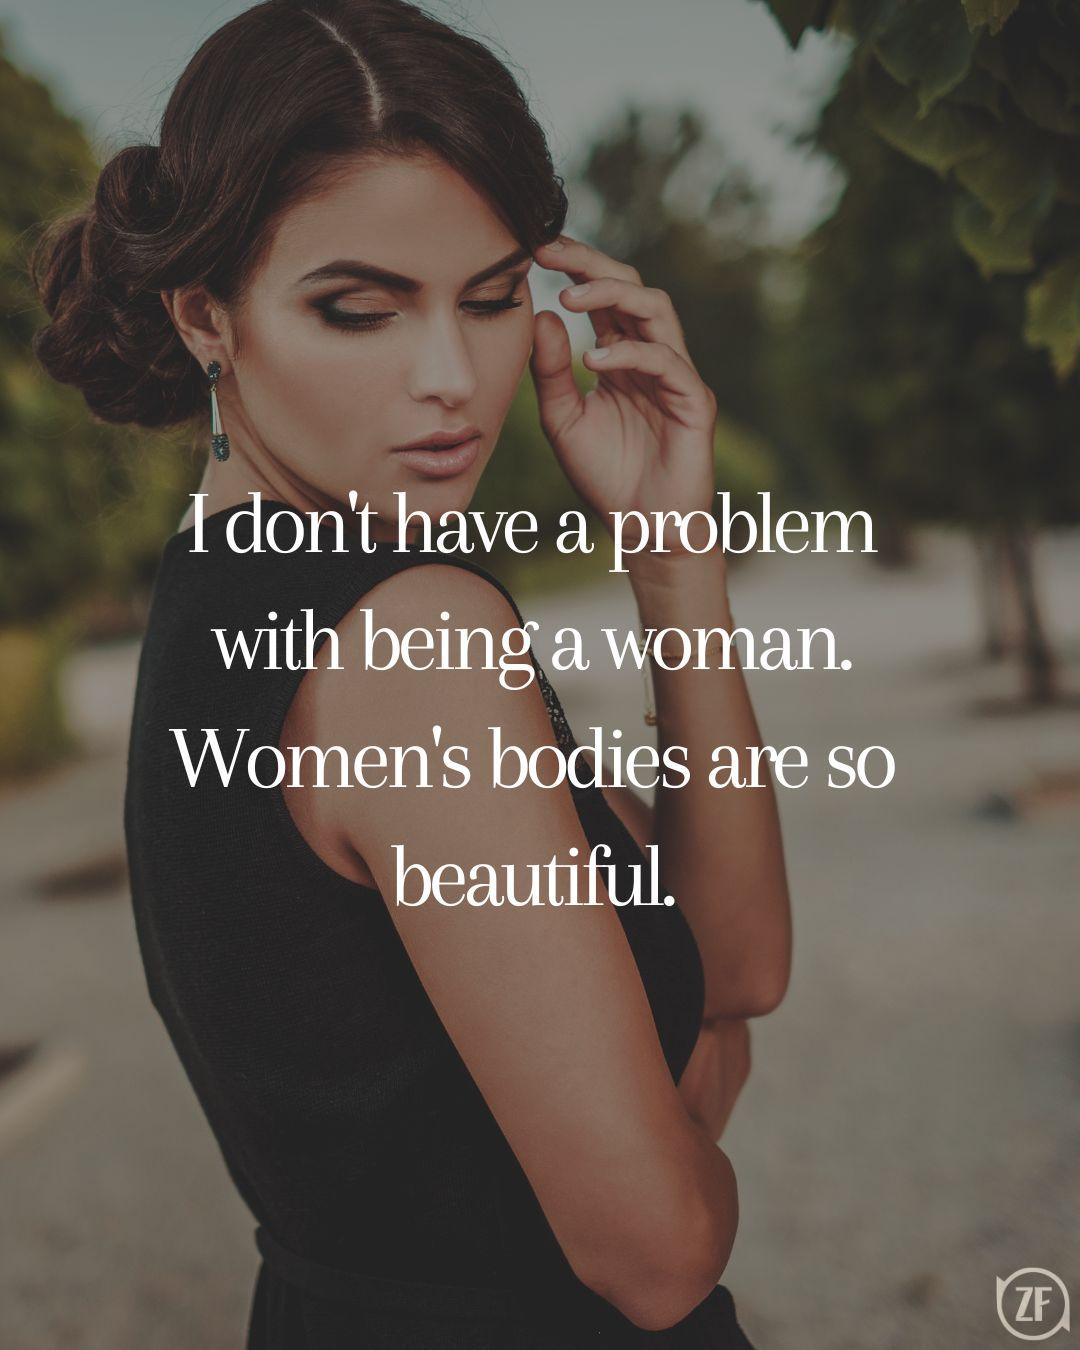 I don't have a problem with being a woman. Women's bodies are so beautiful.